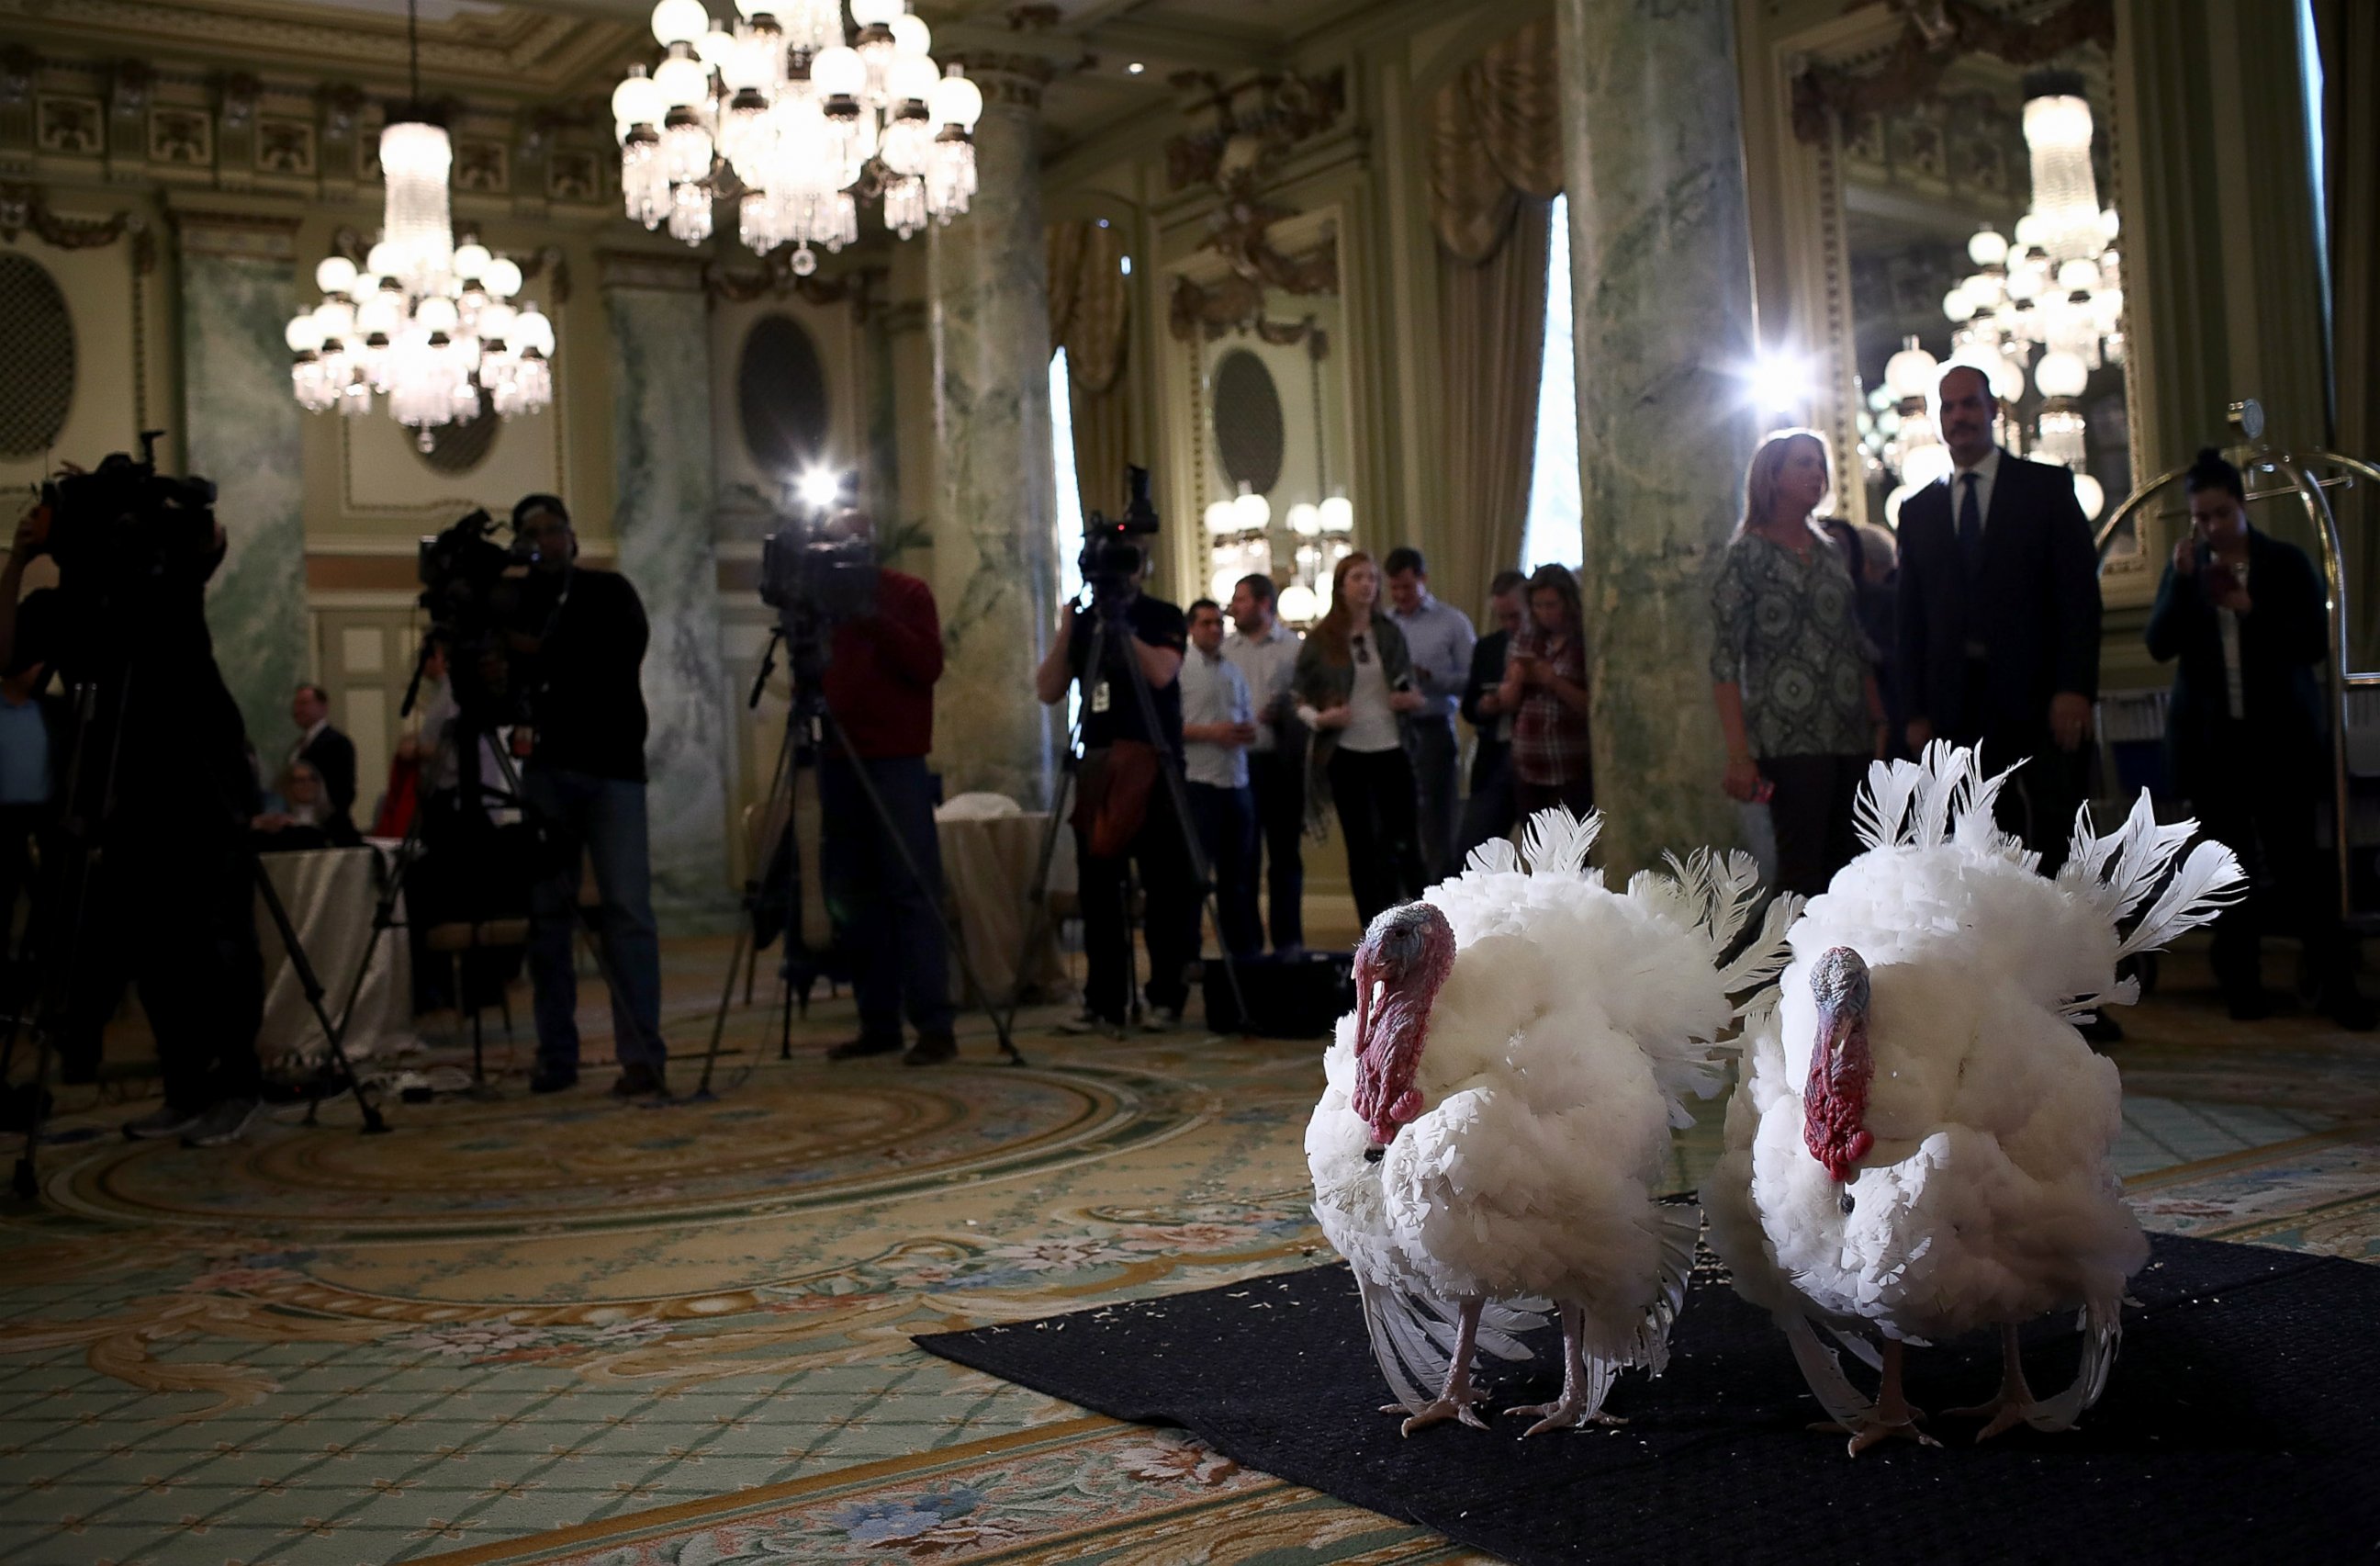 PHOTO: Tater and Tot, the National Thanksgiving Turkey and its alternate, are shown to members of the media during a press conference held by the National Turkey Federation, Nov. 22, 2016 at the Willard Hotel in Washington, D.C.